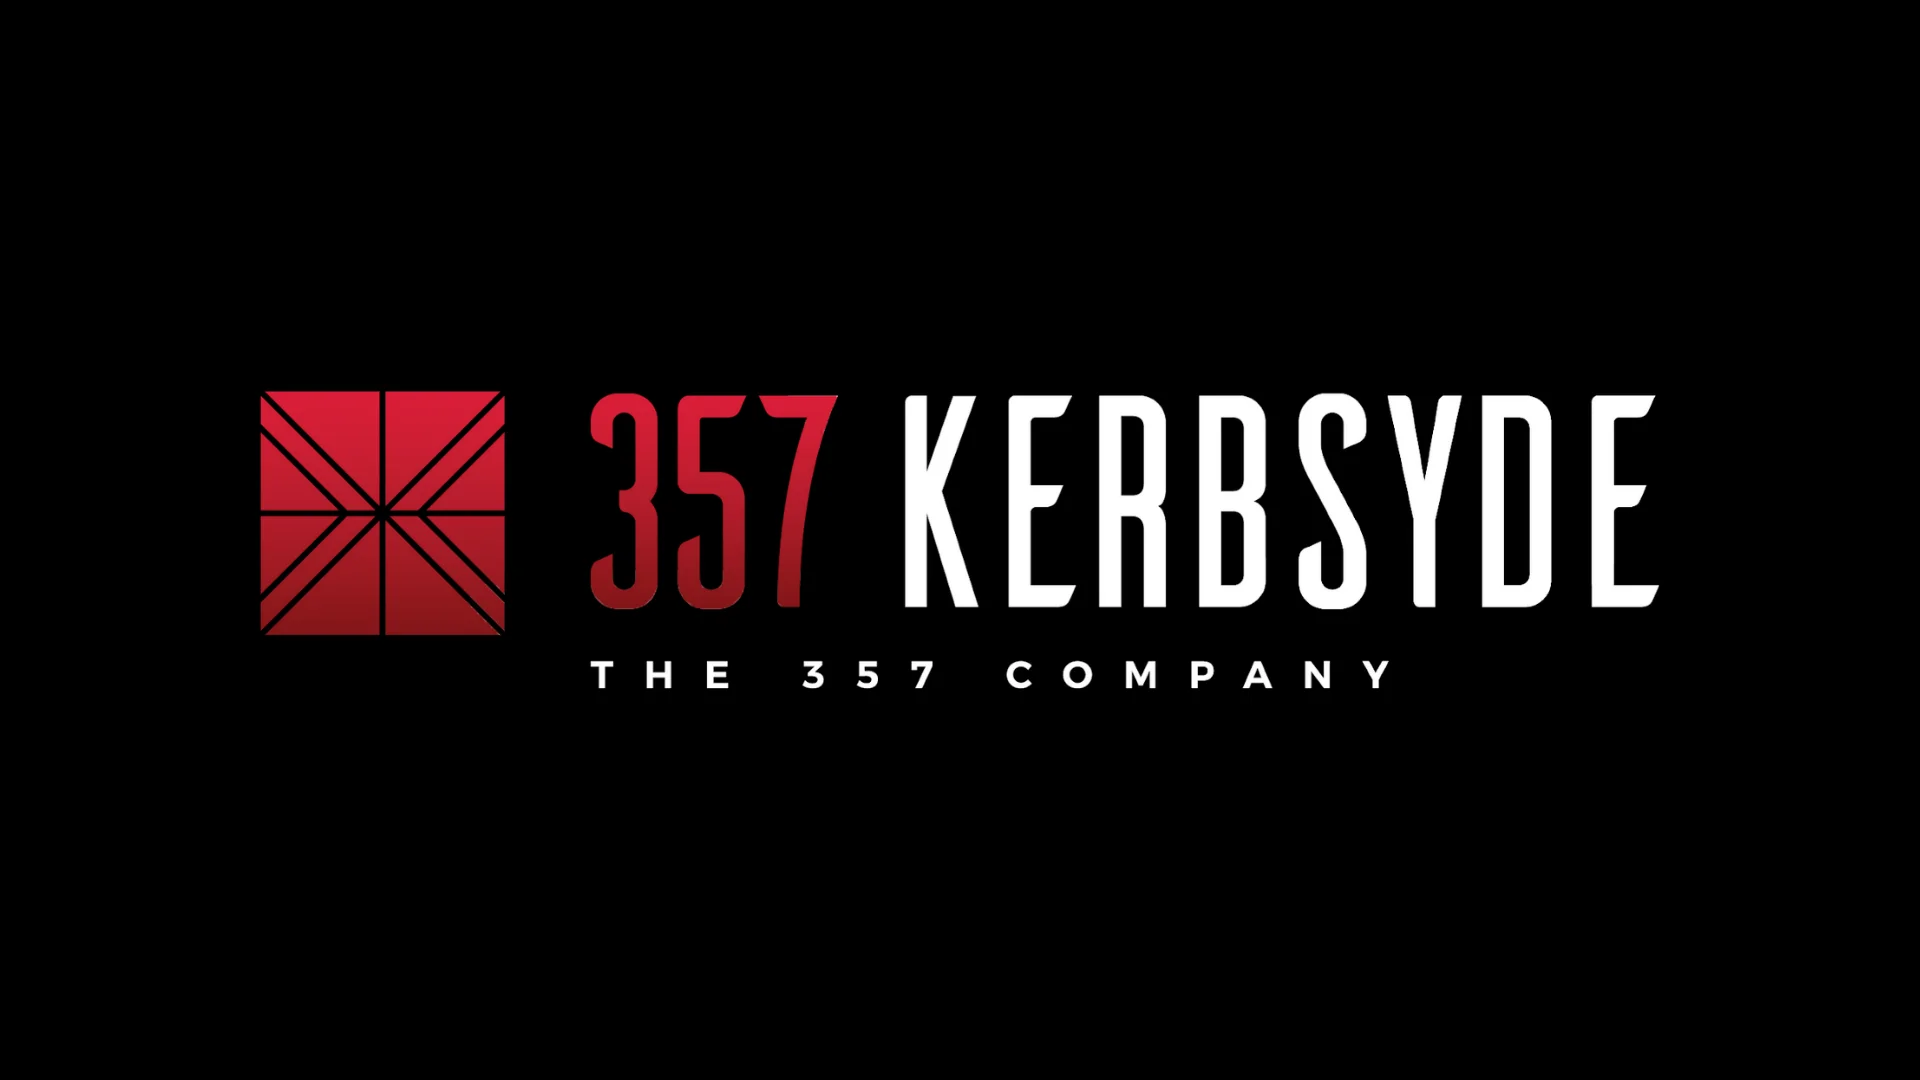 The 357 Company Launches Last Mile Delivery Service Division 357 Kerbsyde